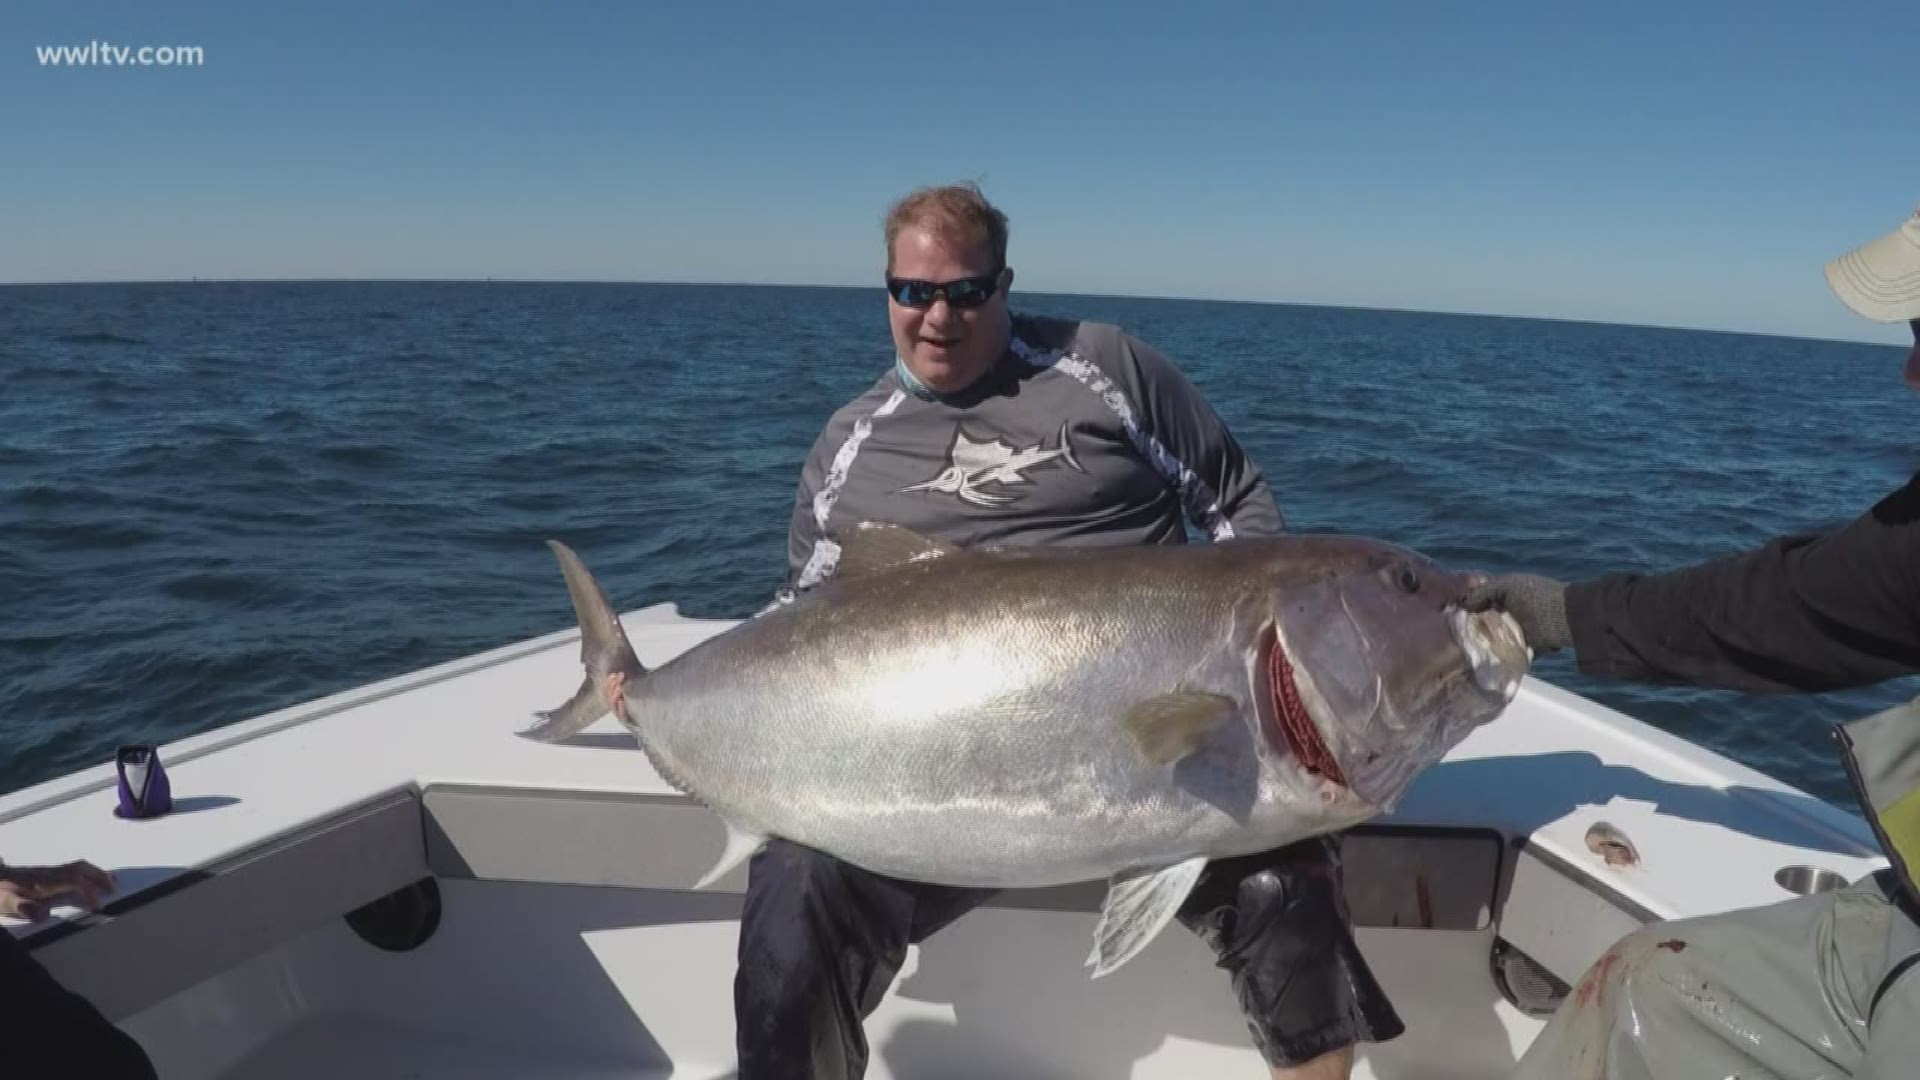 Several new first place rod and reel category state records were set including Chris Legrand's 140 lbs. greater amberjack.